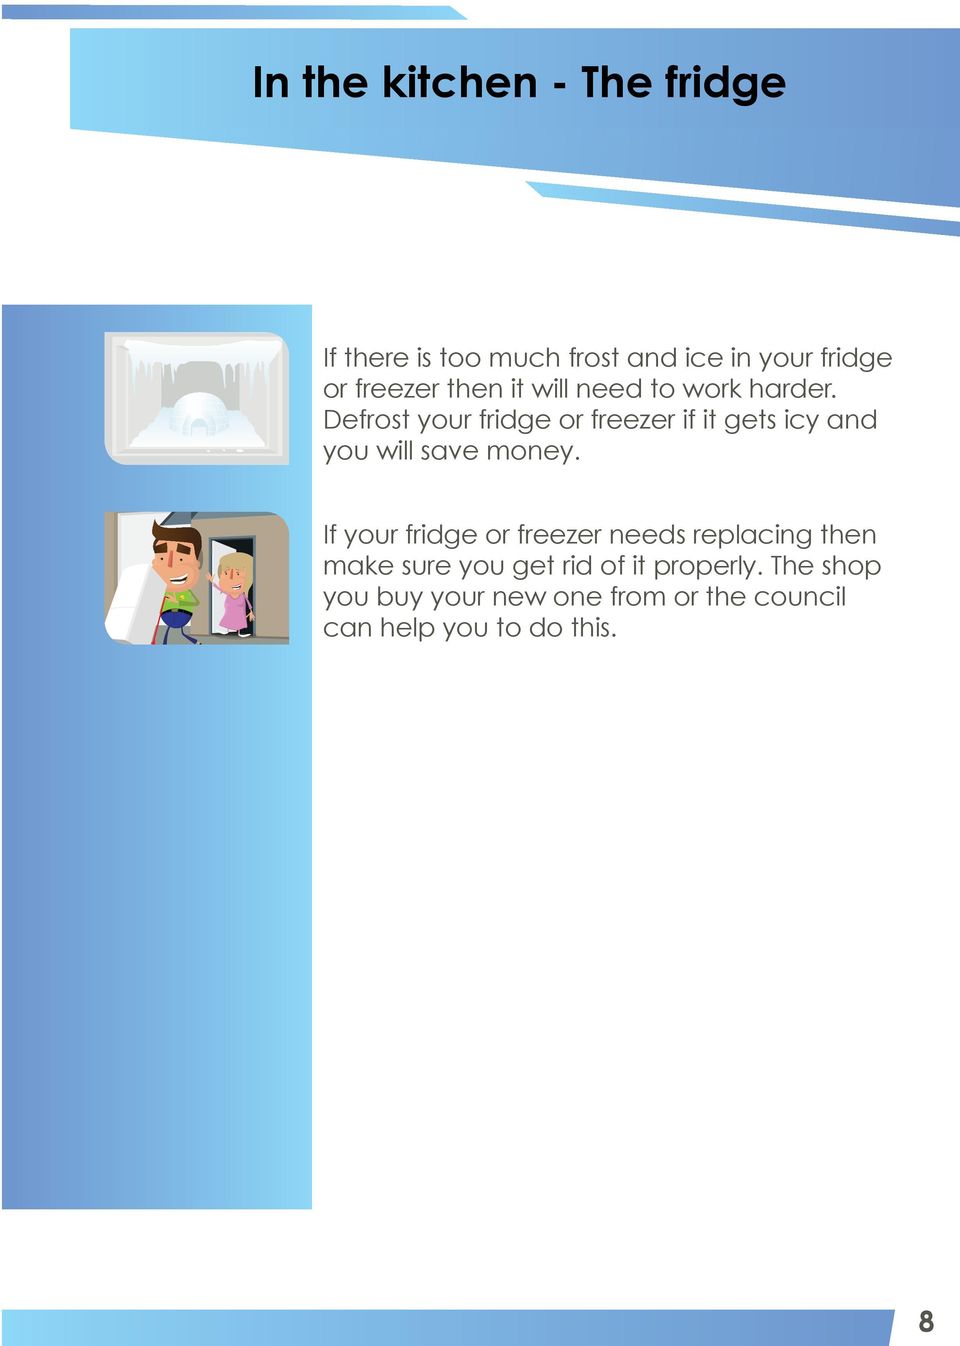 Defrost your fridge or freezer if it gets icy and you will save money.